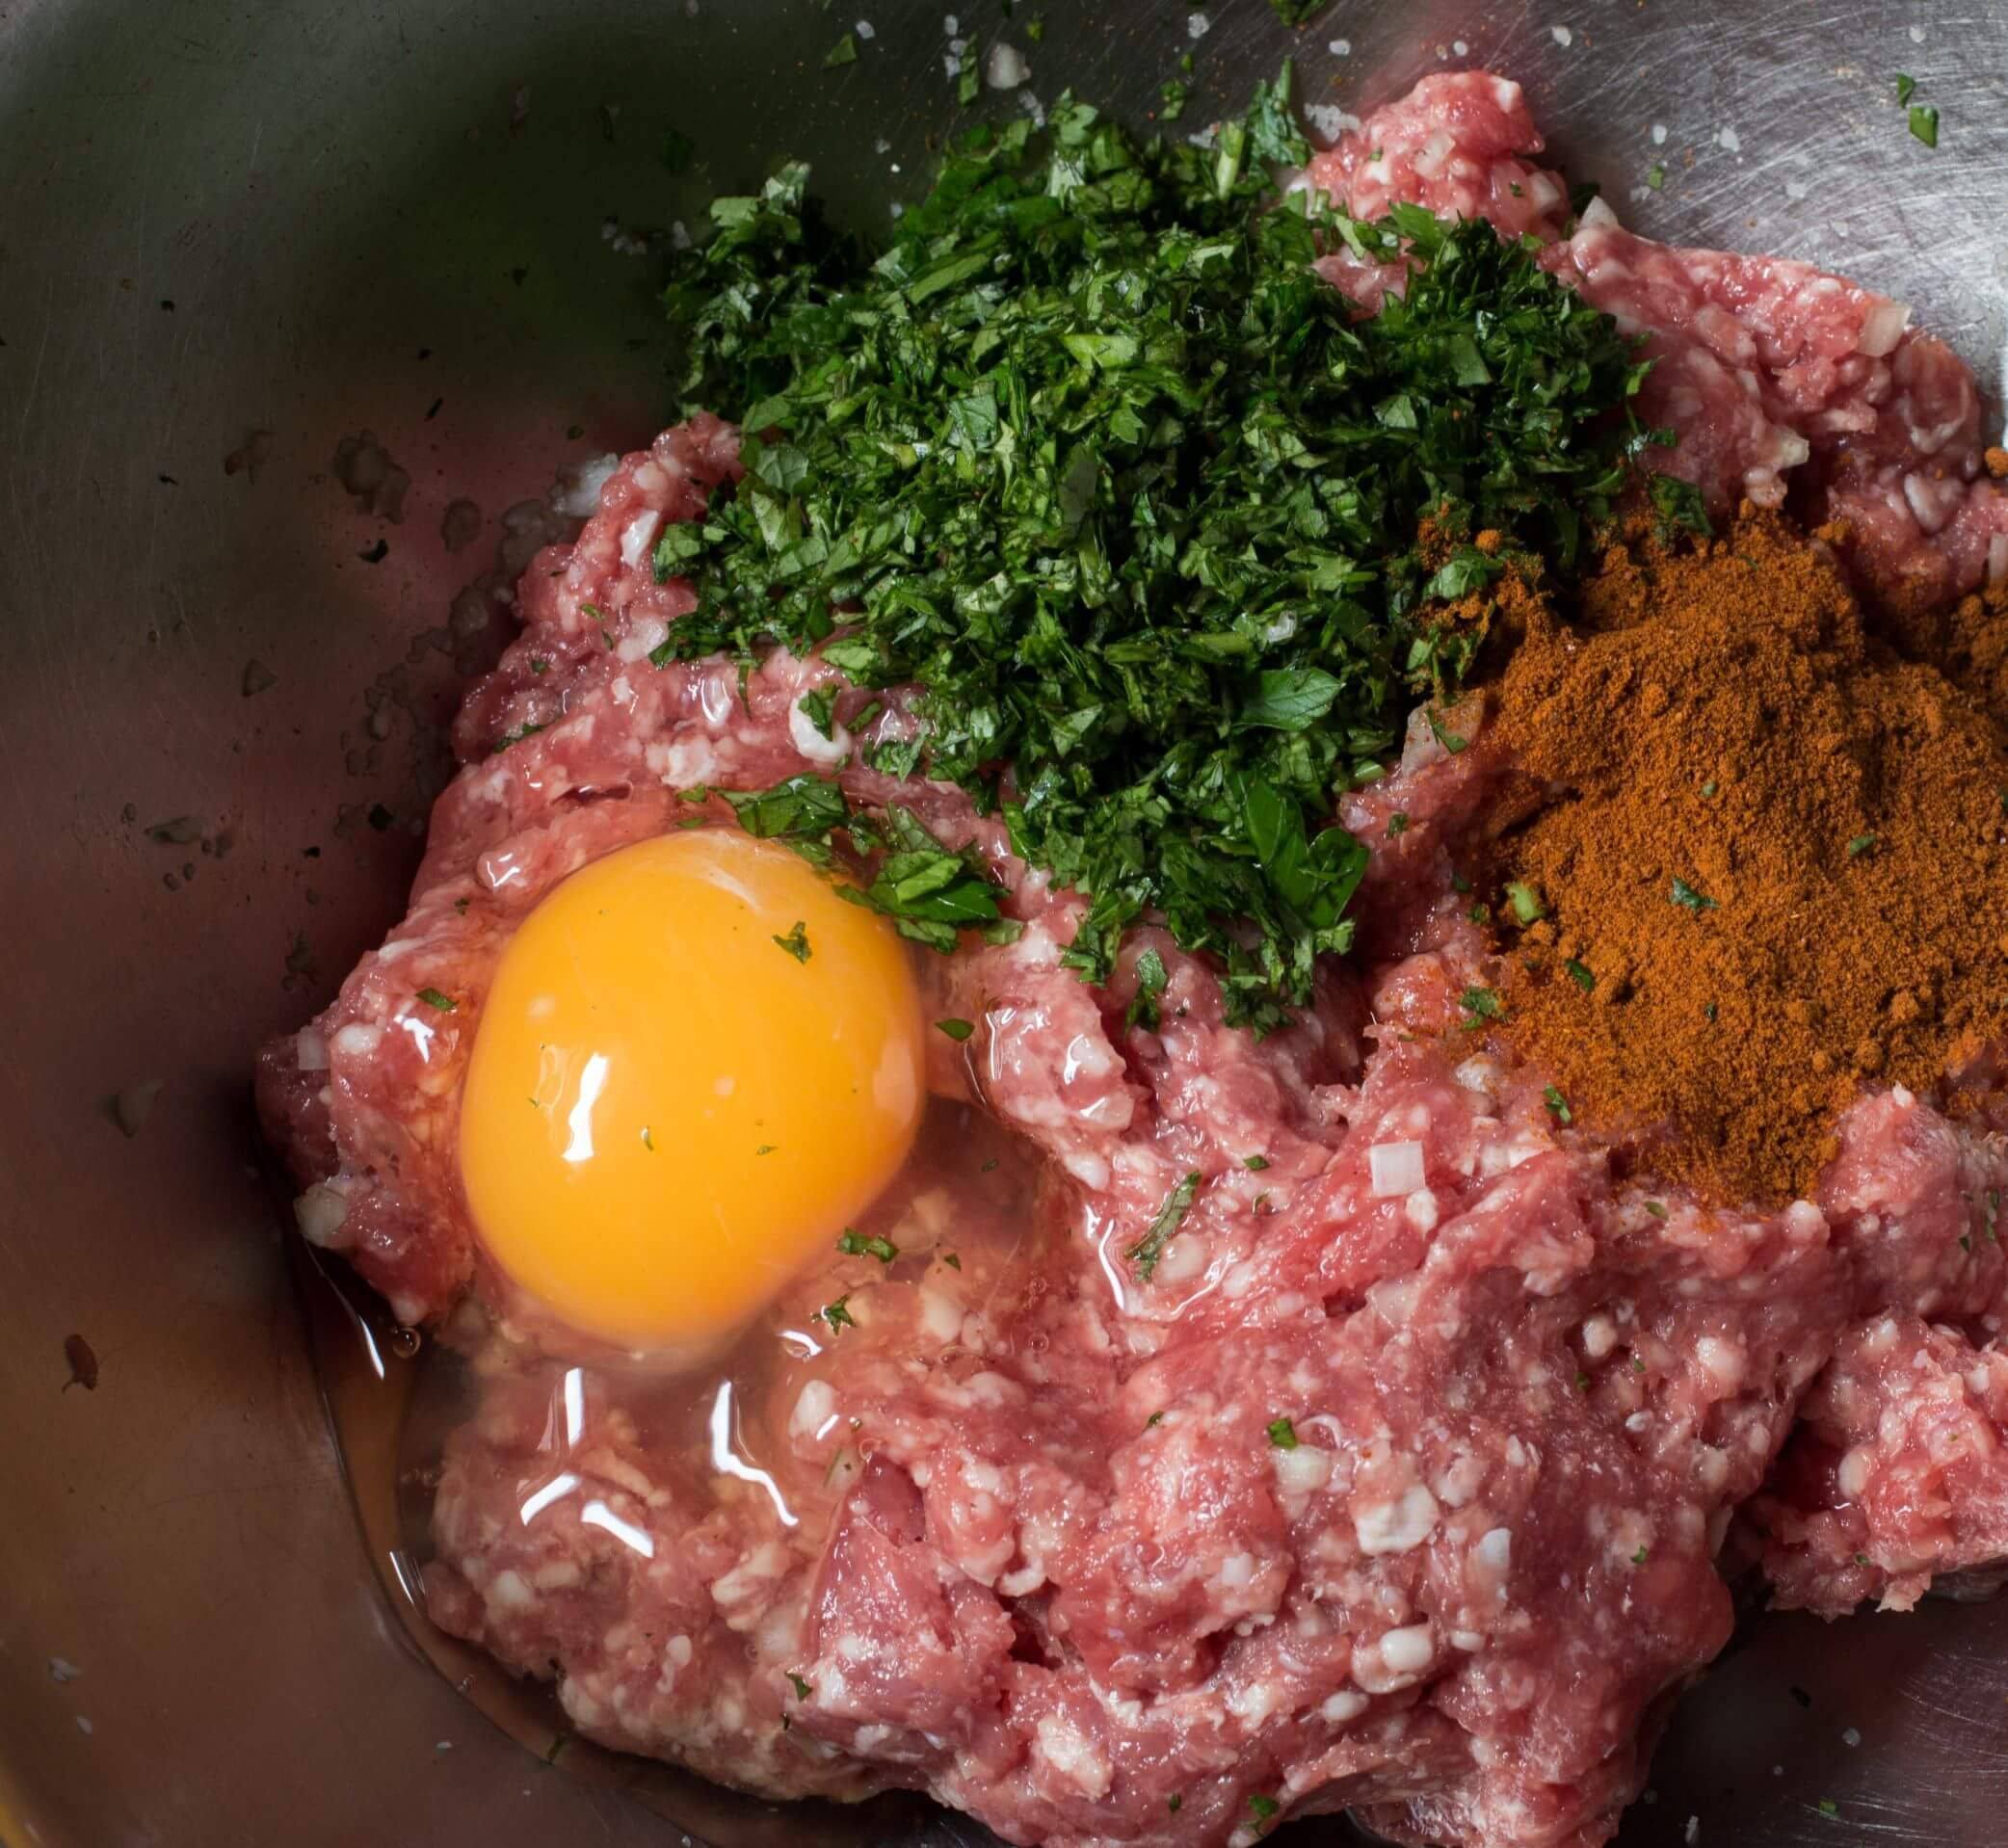 Mixing ground lamb with spices, herbs and egg in a mixing bowl.